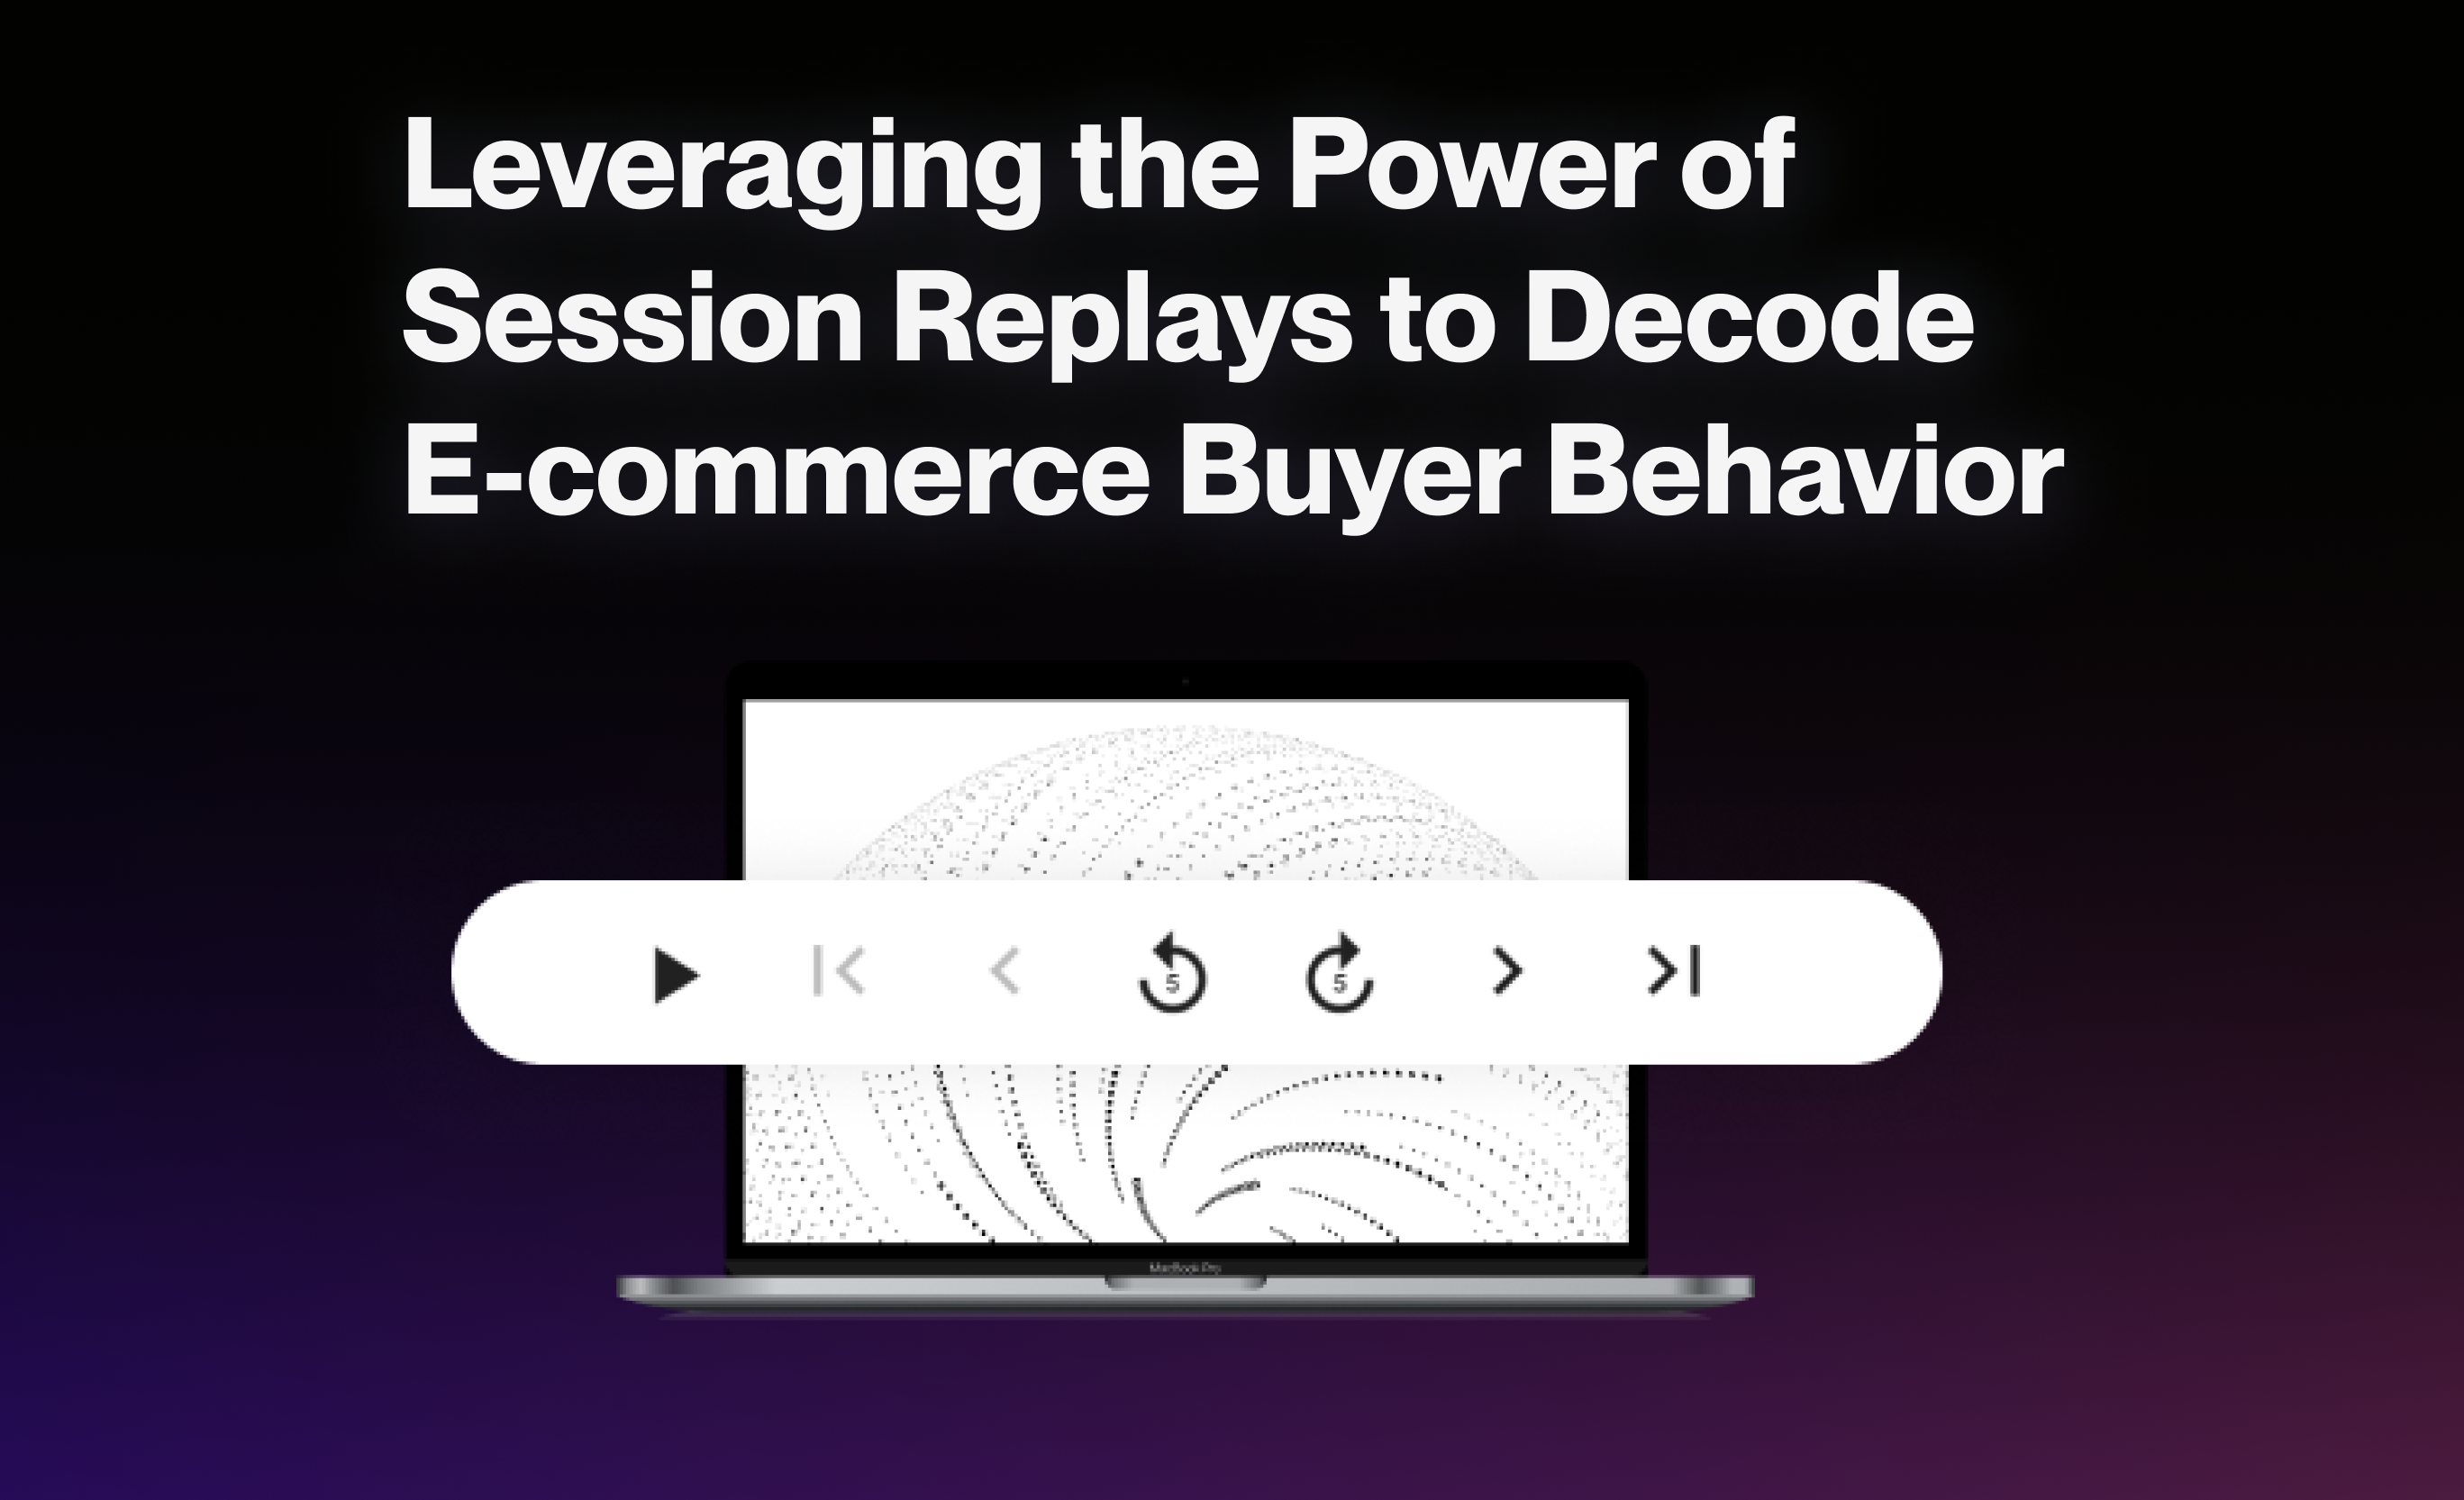 session replays in e-commerce